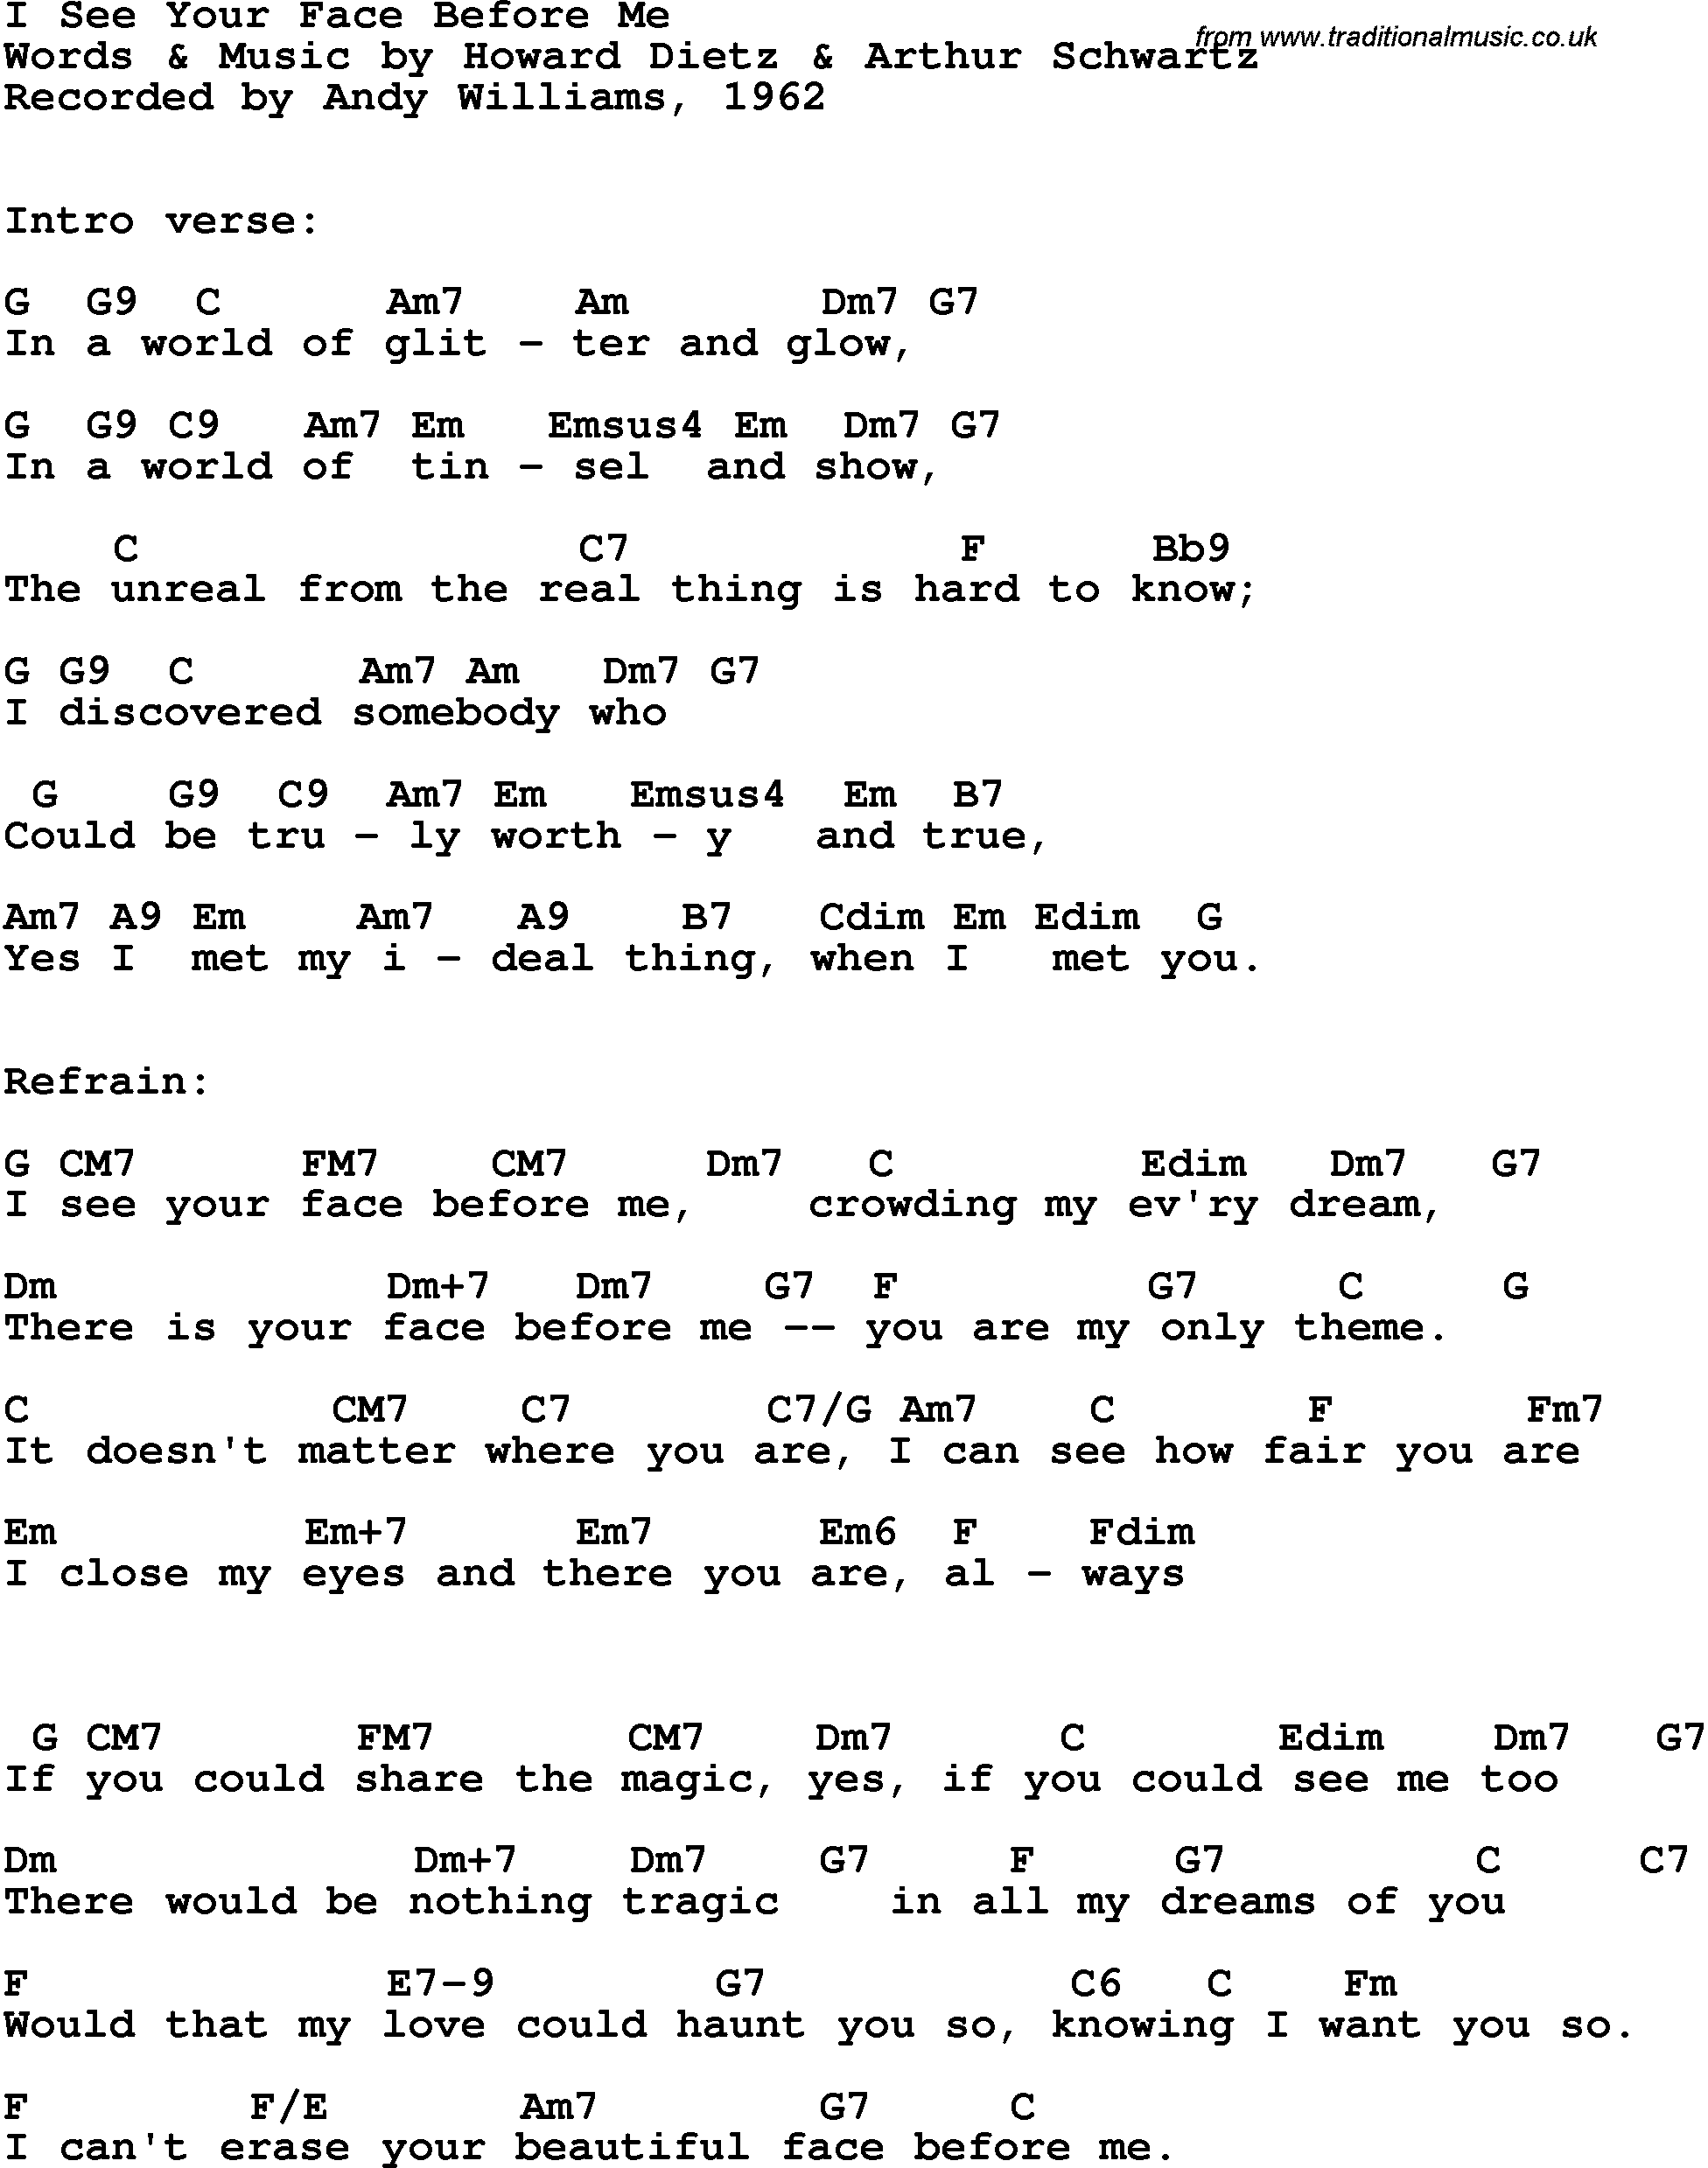 Song Lyrics with guitar chords for I See Your Face Before Me - Andy Williams, 1962